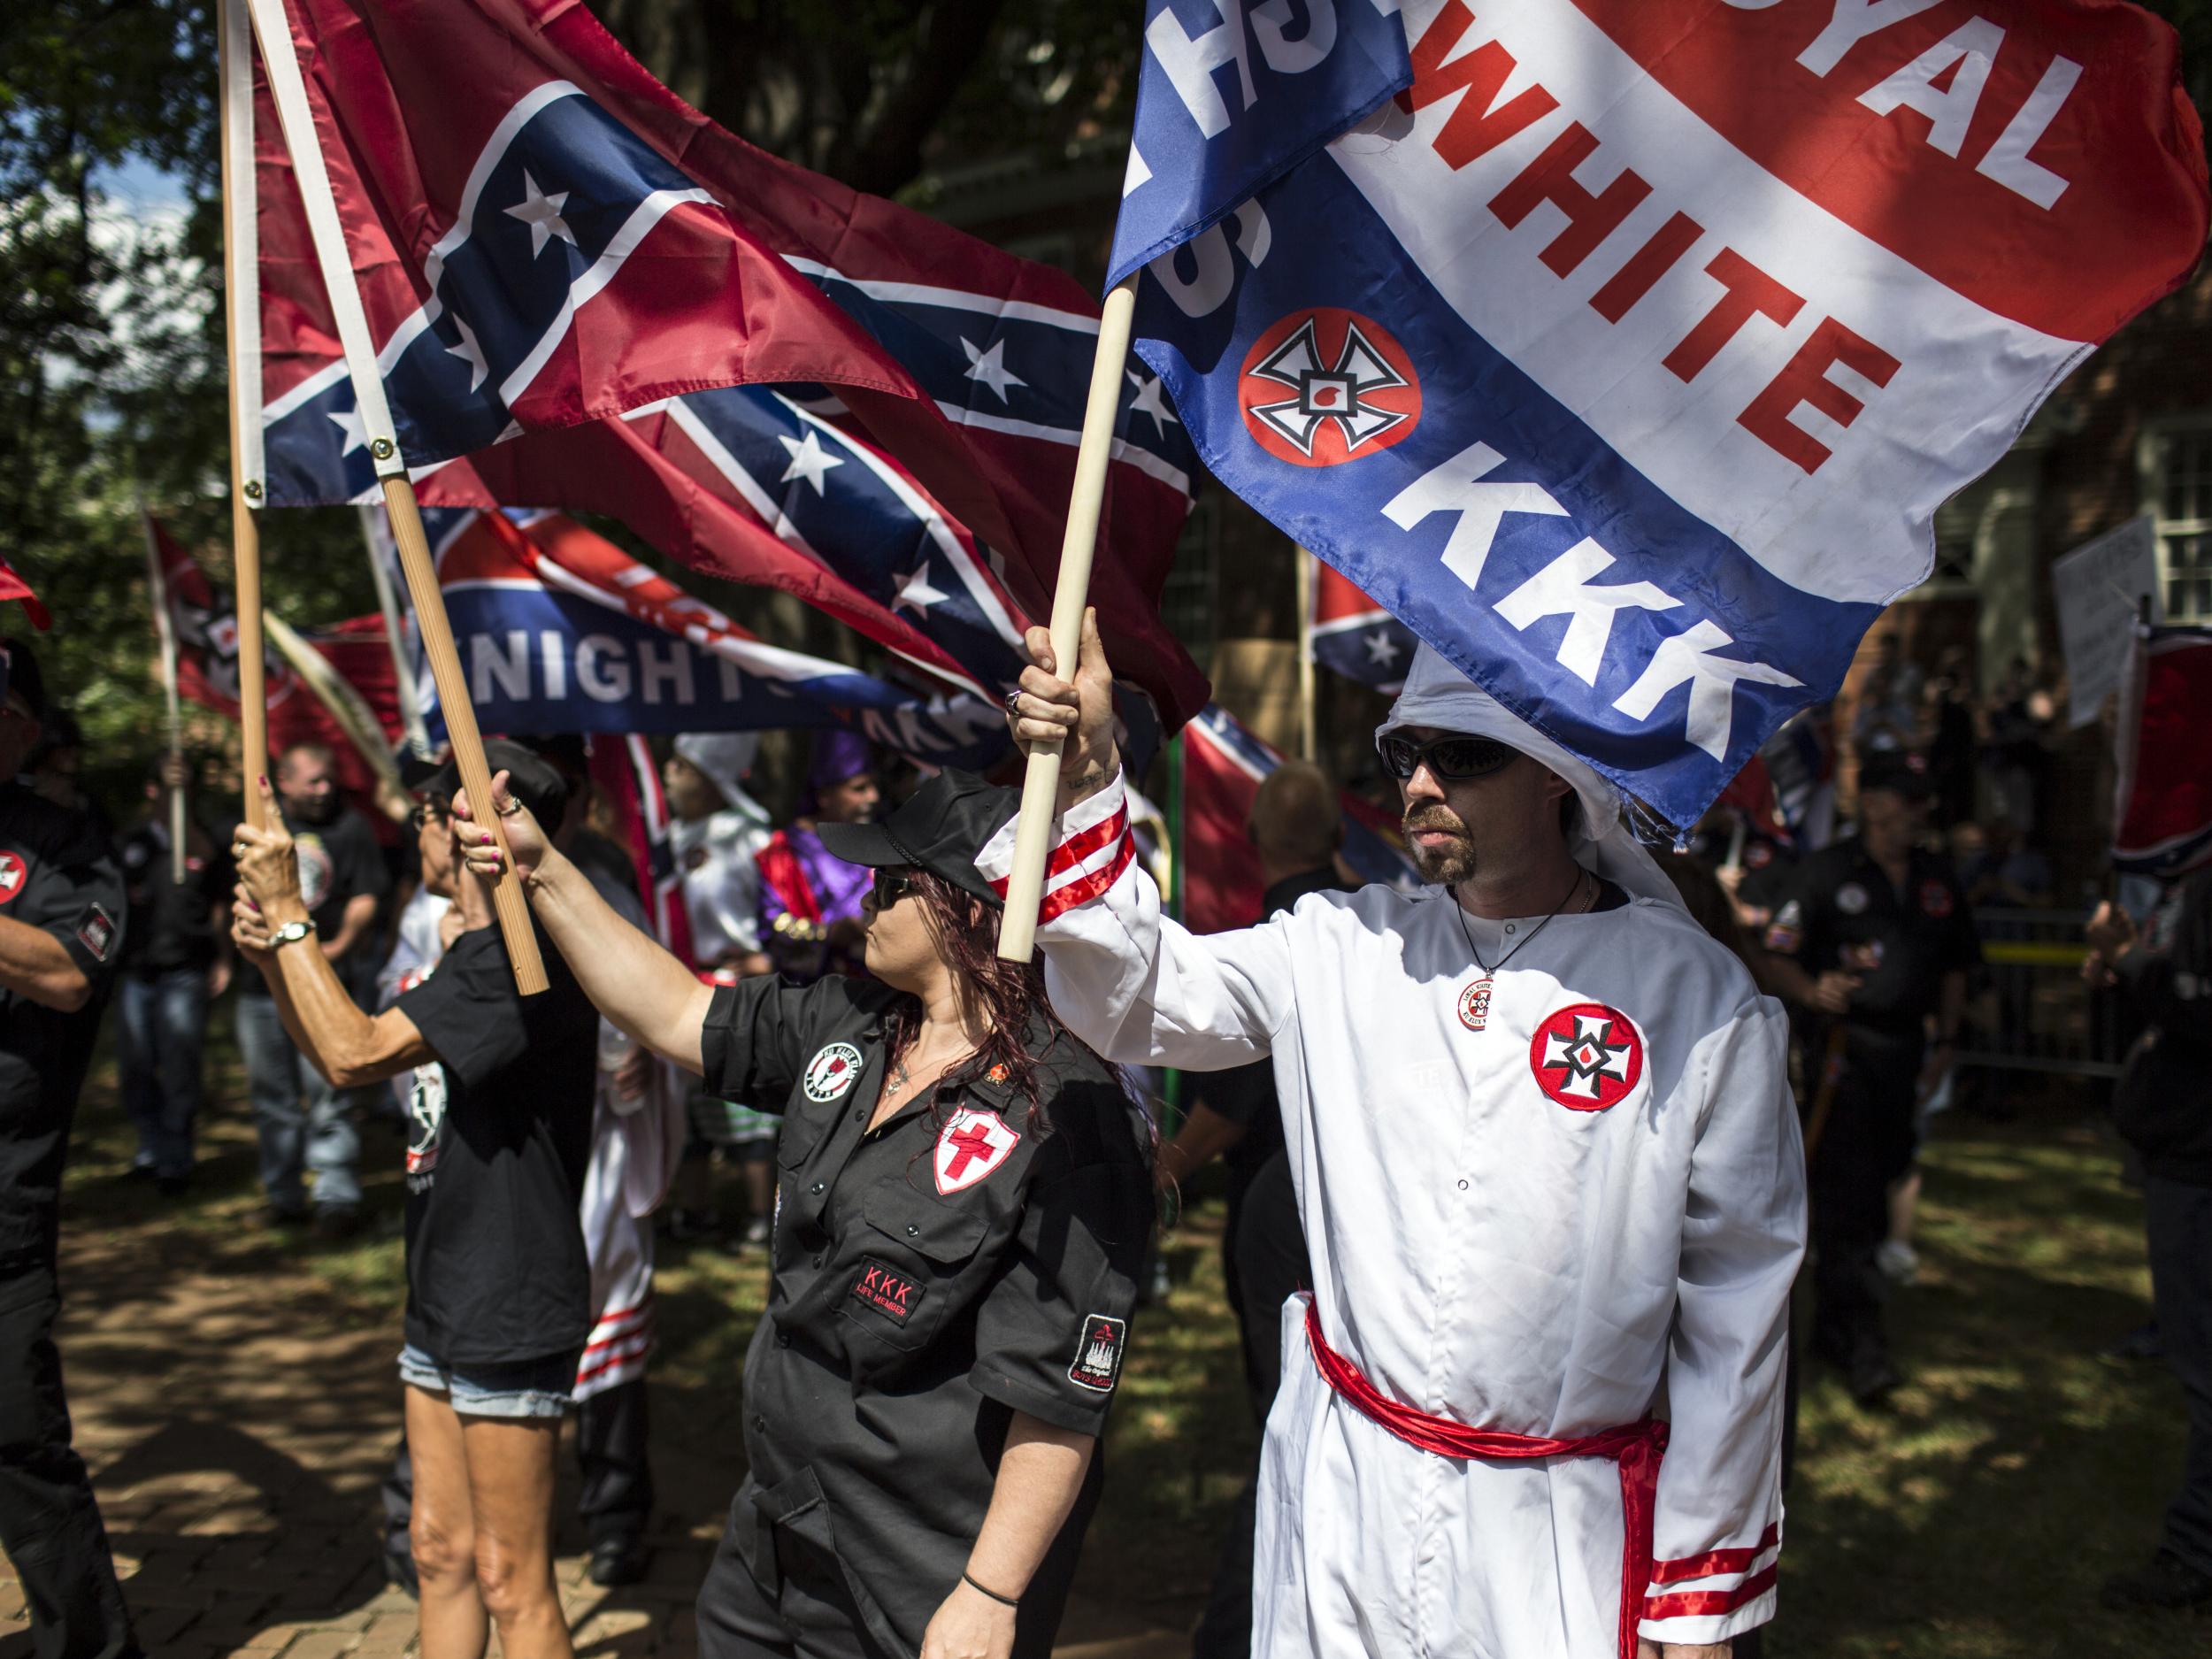 Members of the KKK march in Charlottesville, Virginia